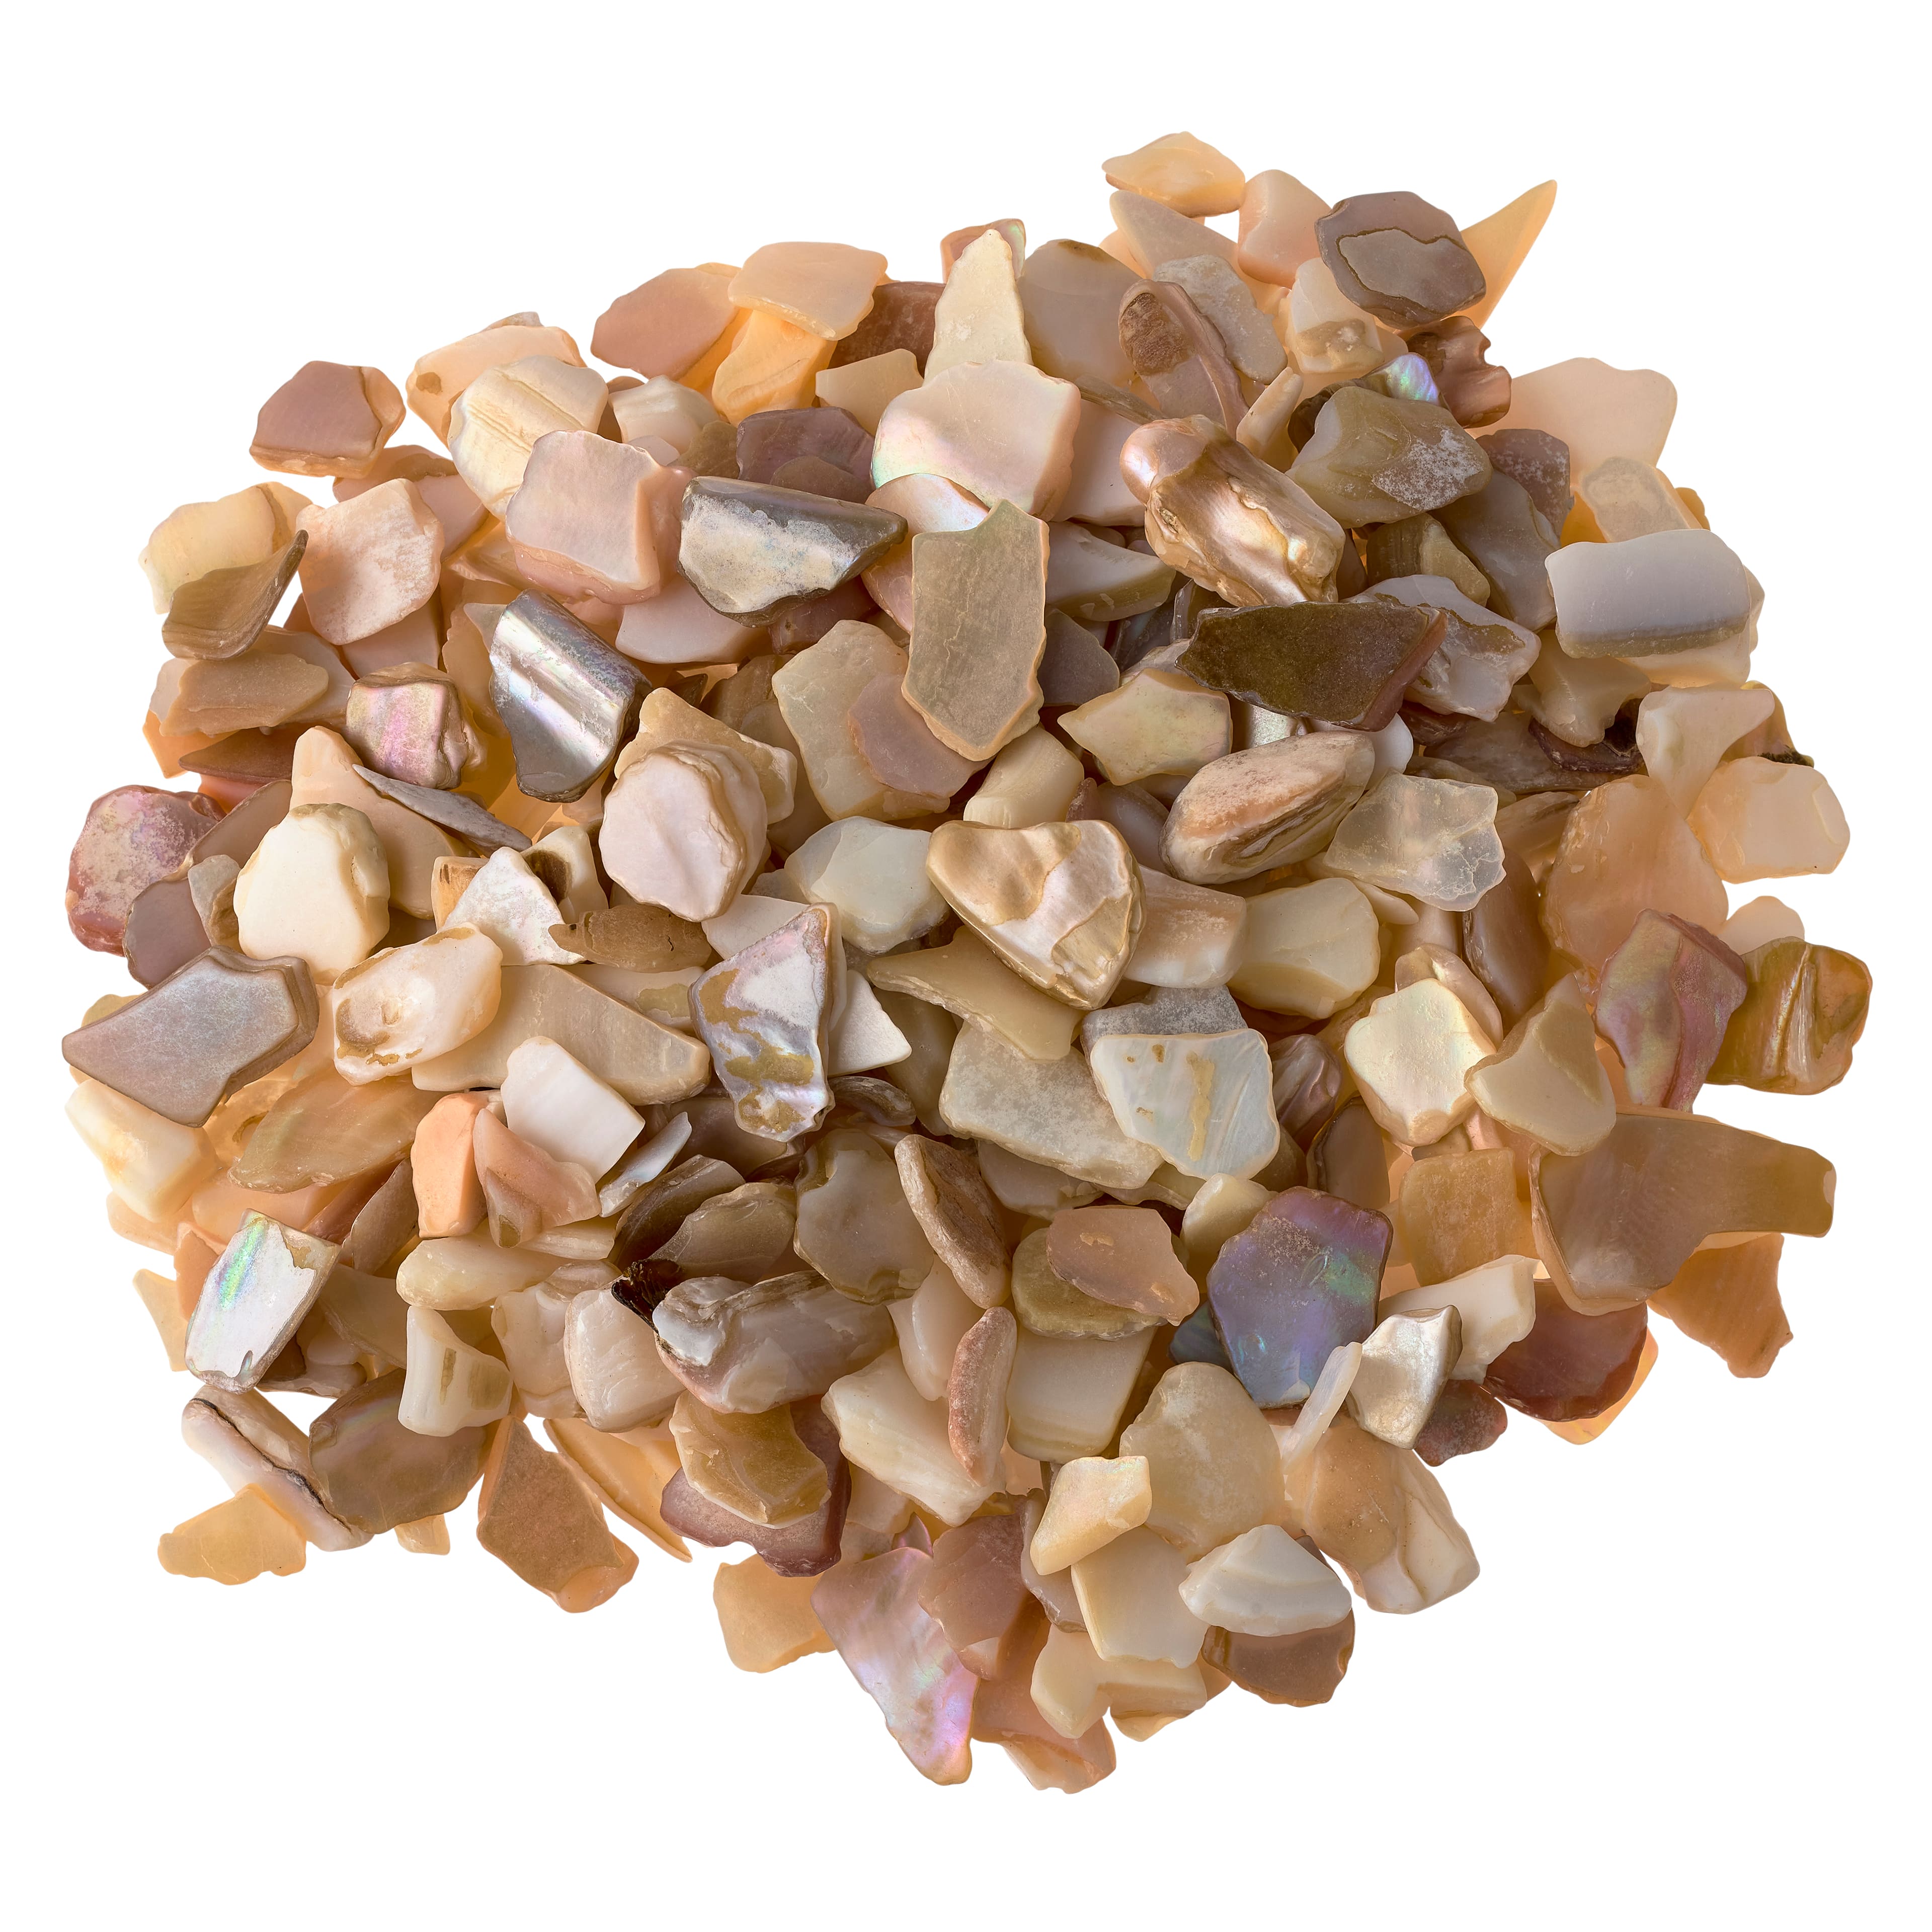 Shop for the Natural Crushed Shells By Ashland™ at Michaels